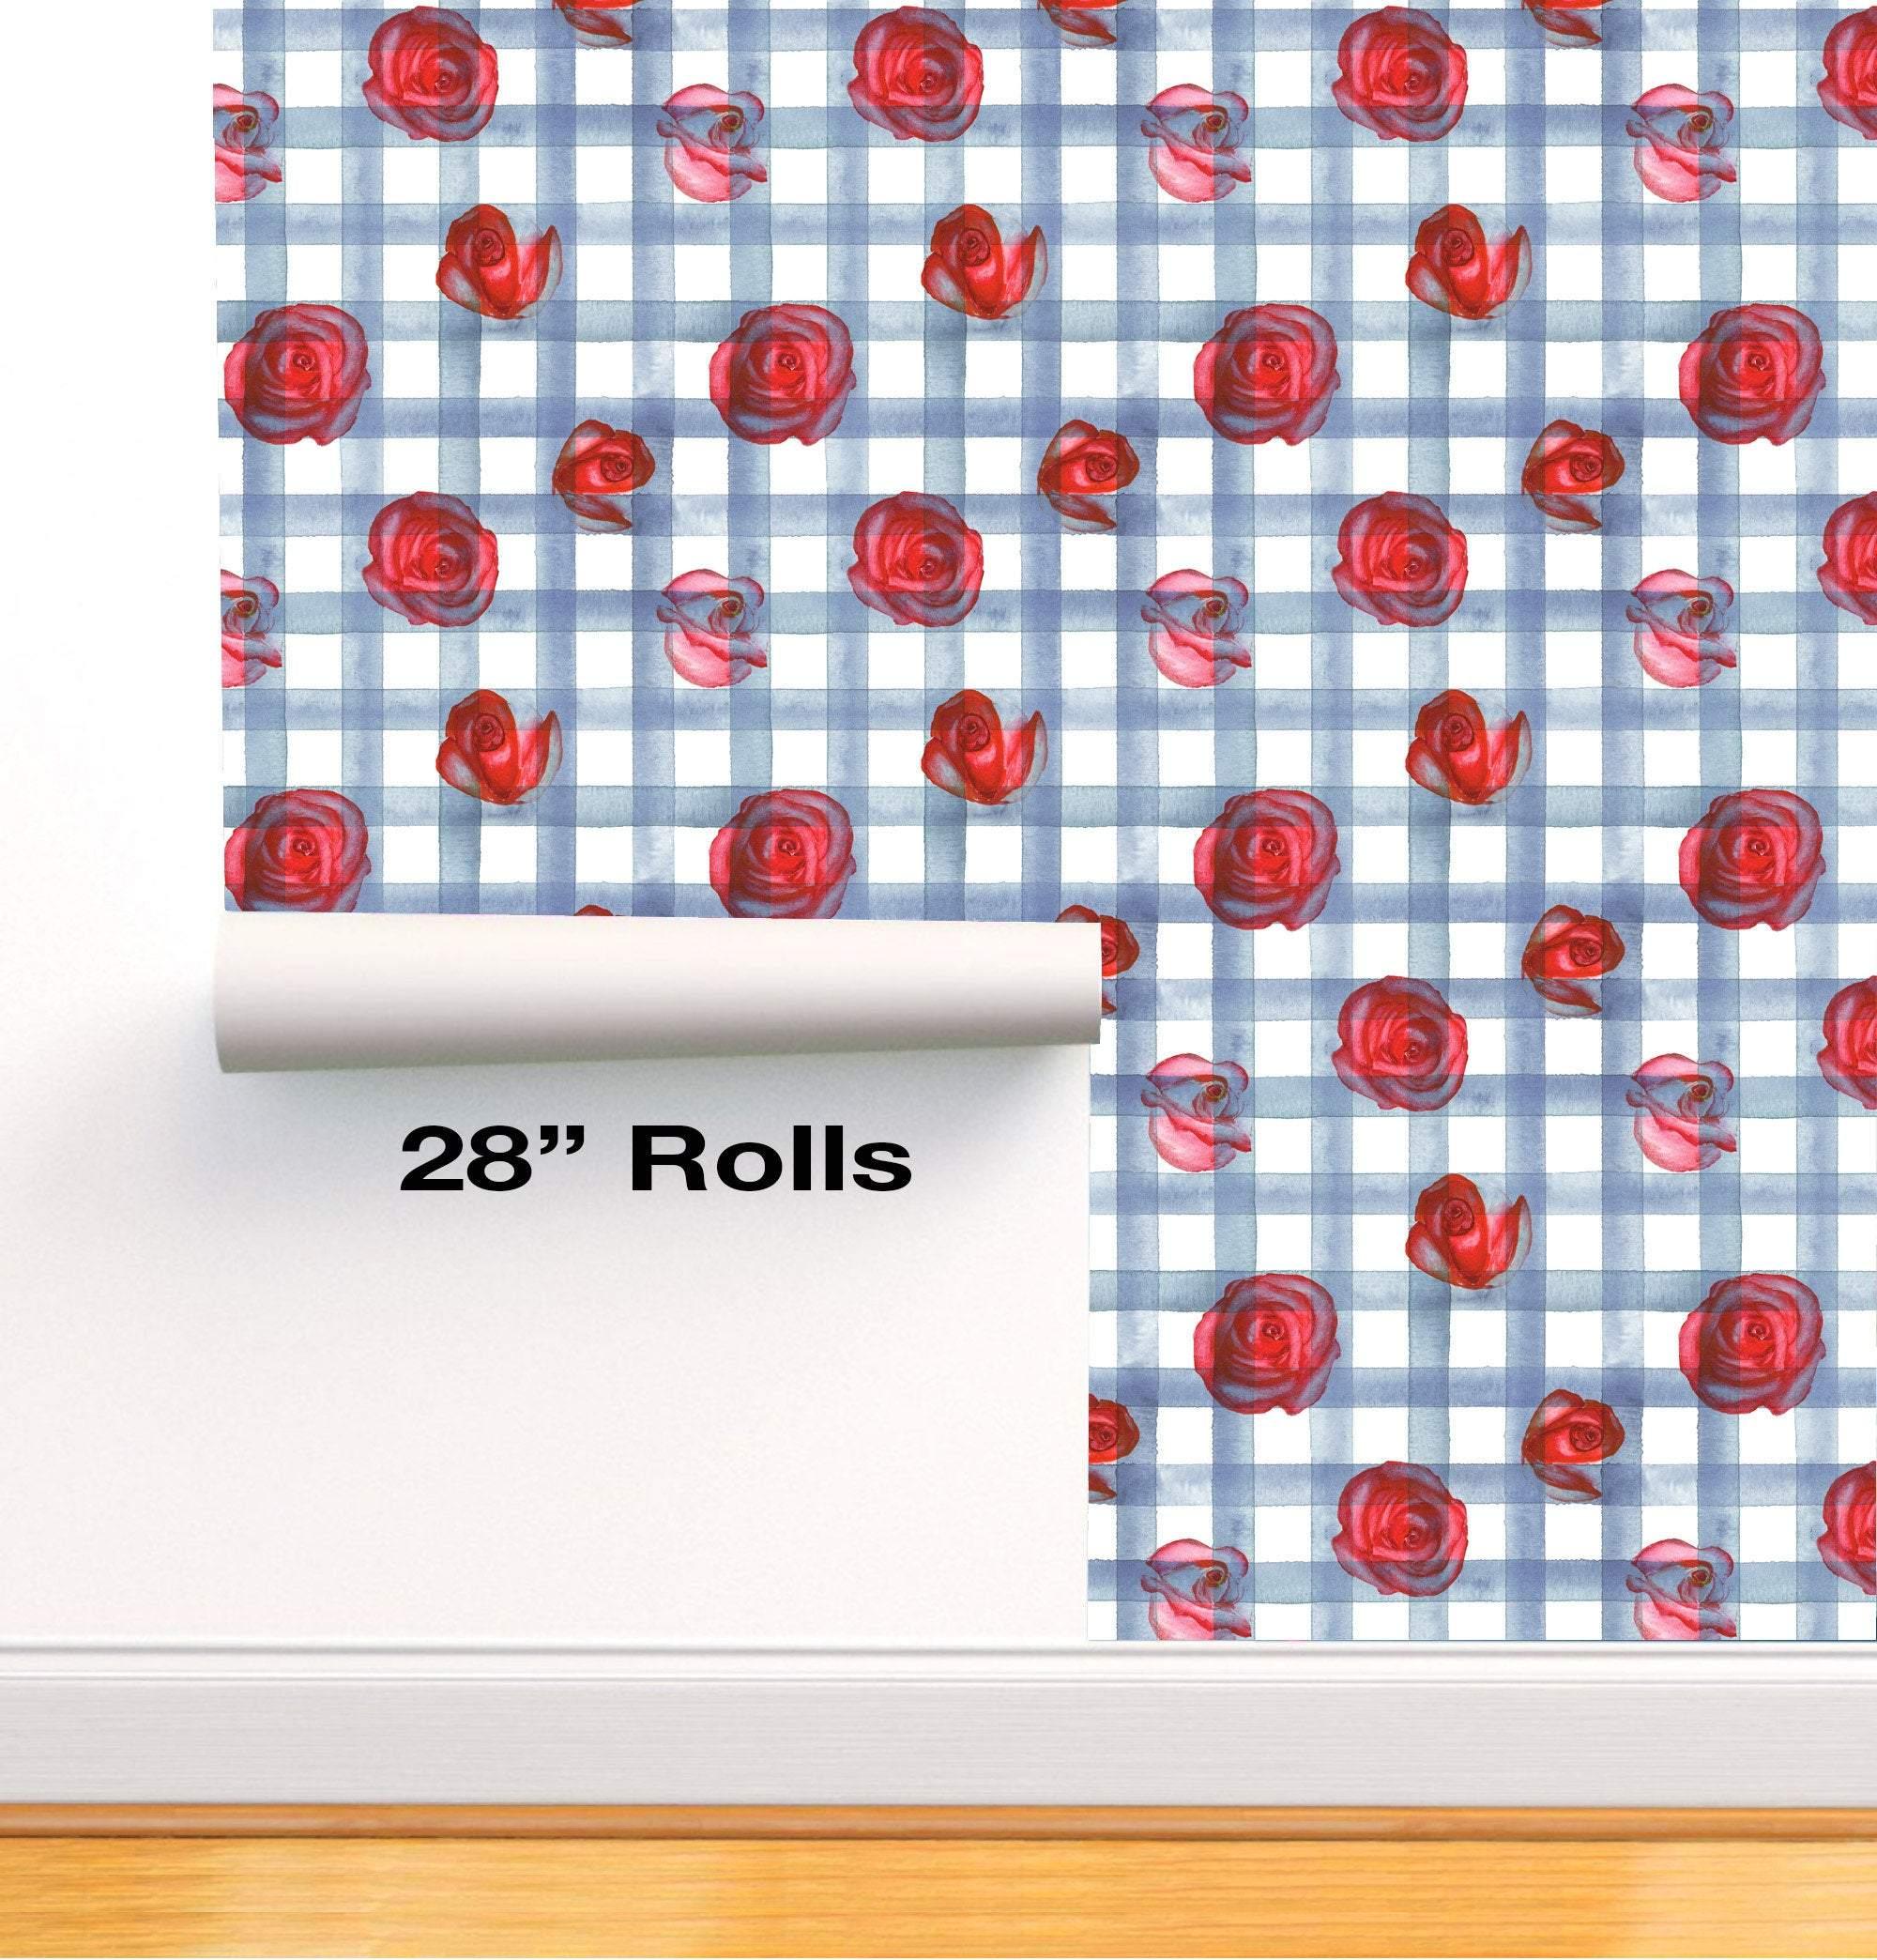 Roses on Blue Strips Removable Wallpaper in 28" Rolls